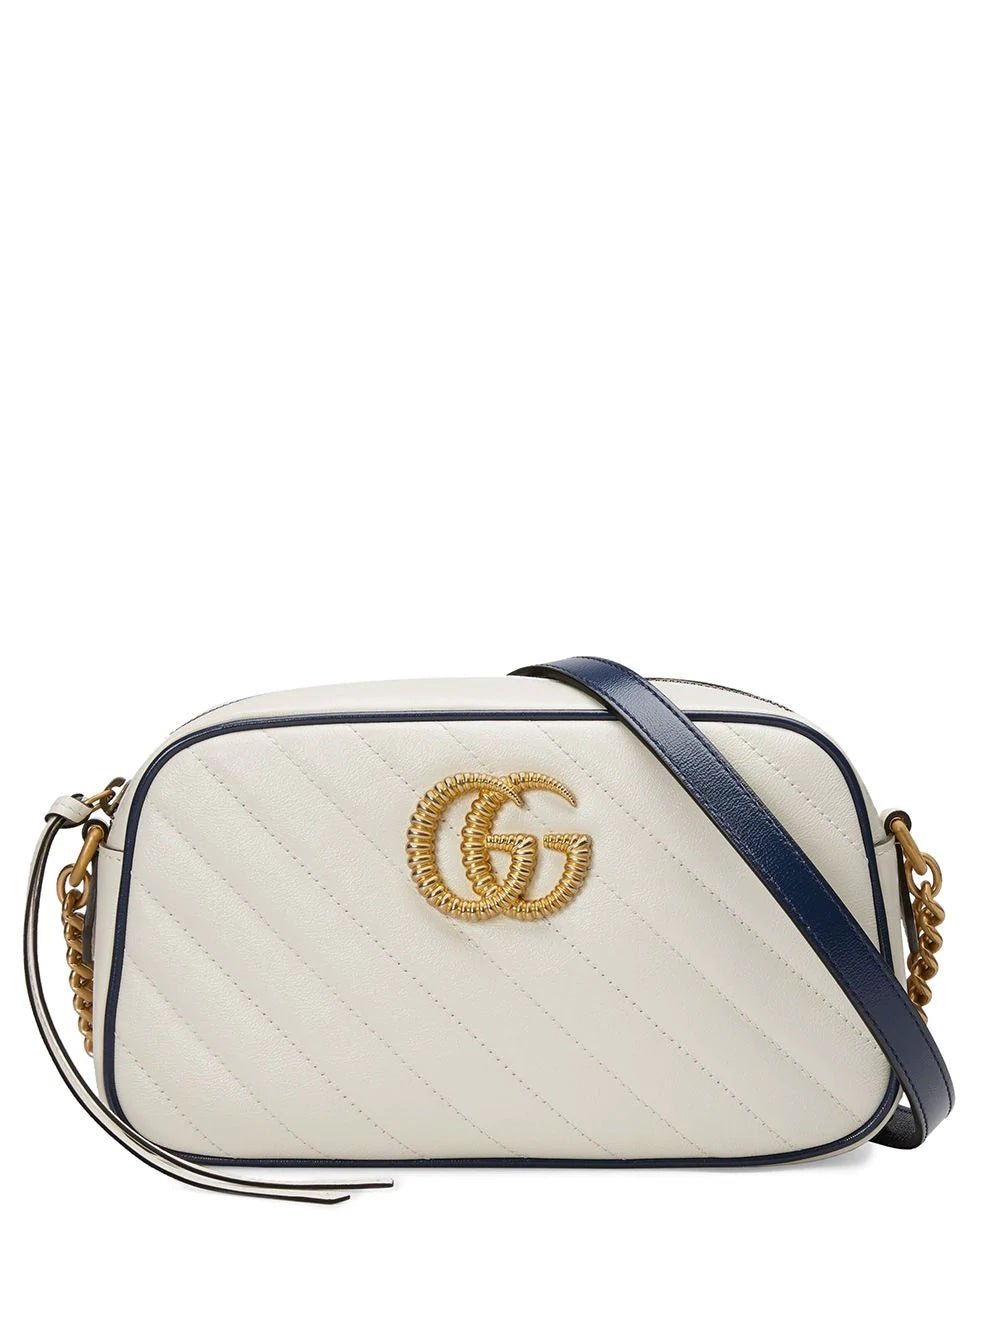 Gucci Small GG Marmont Shoulder Bag in White